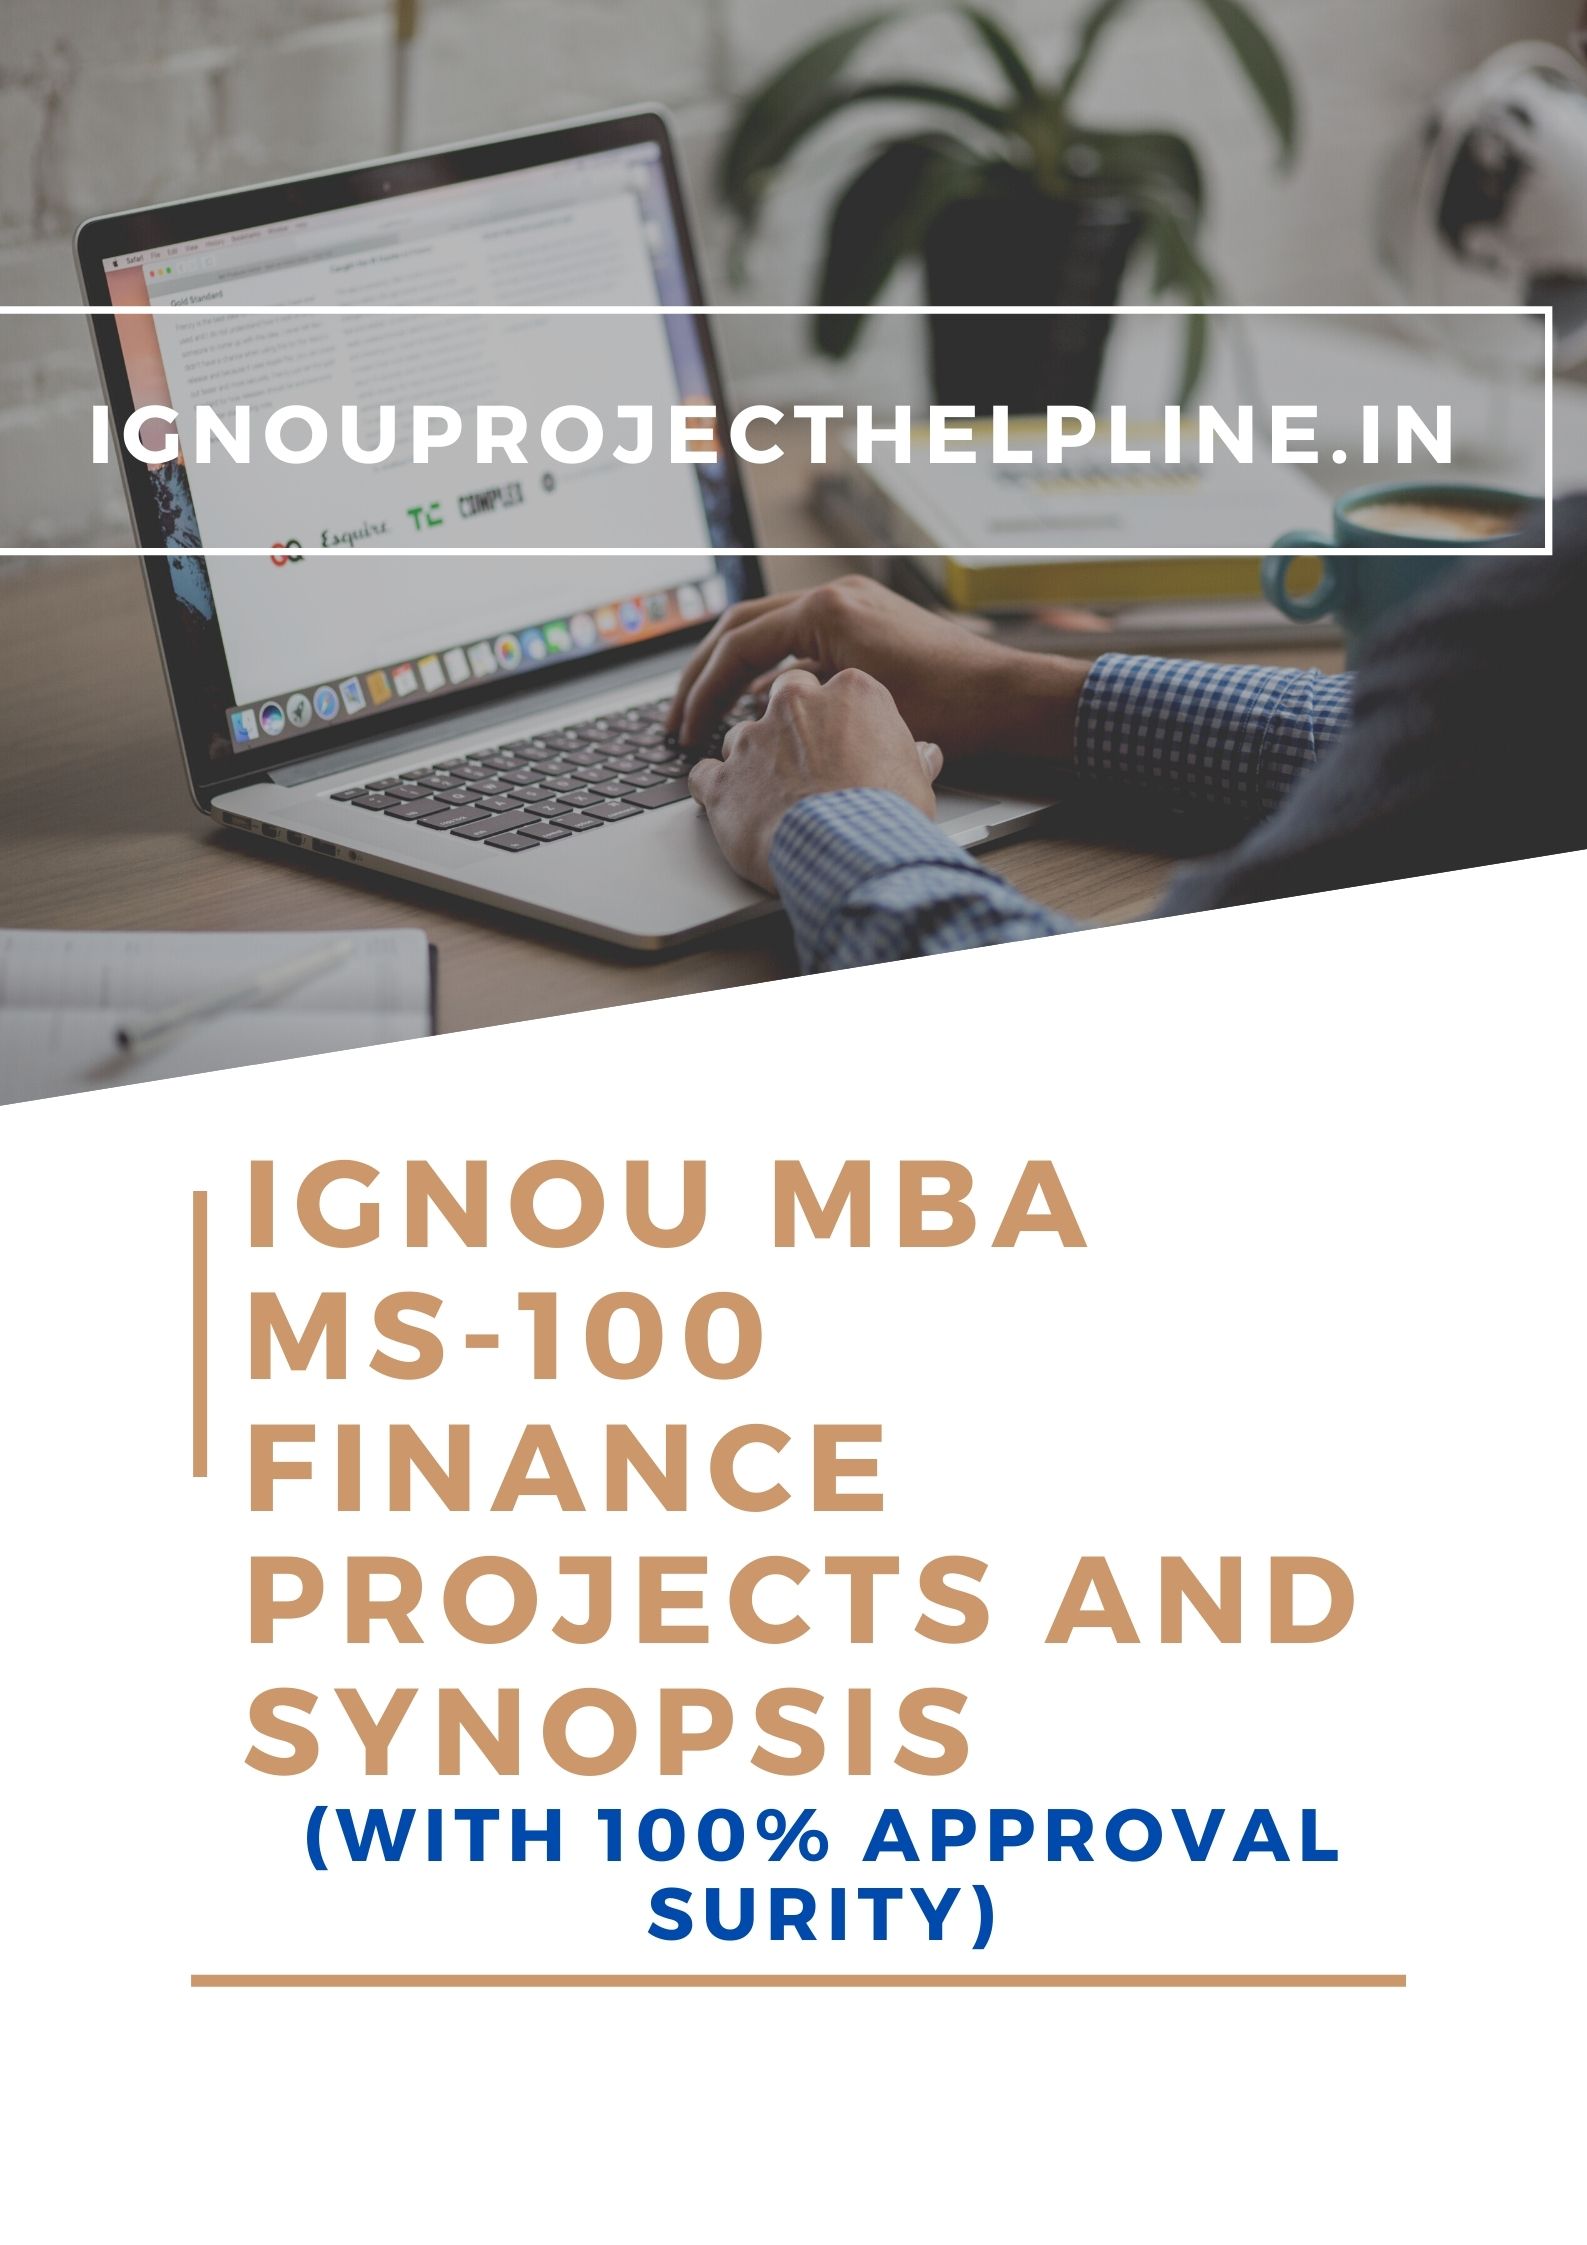 IGNOU MBA FINANCE(MS-100) PROJECT SYNOPSIS